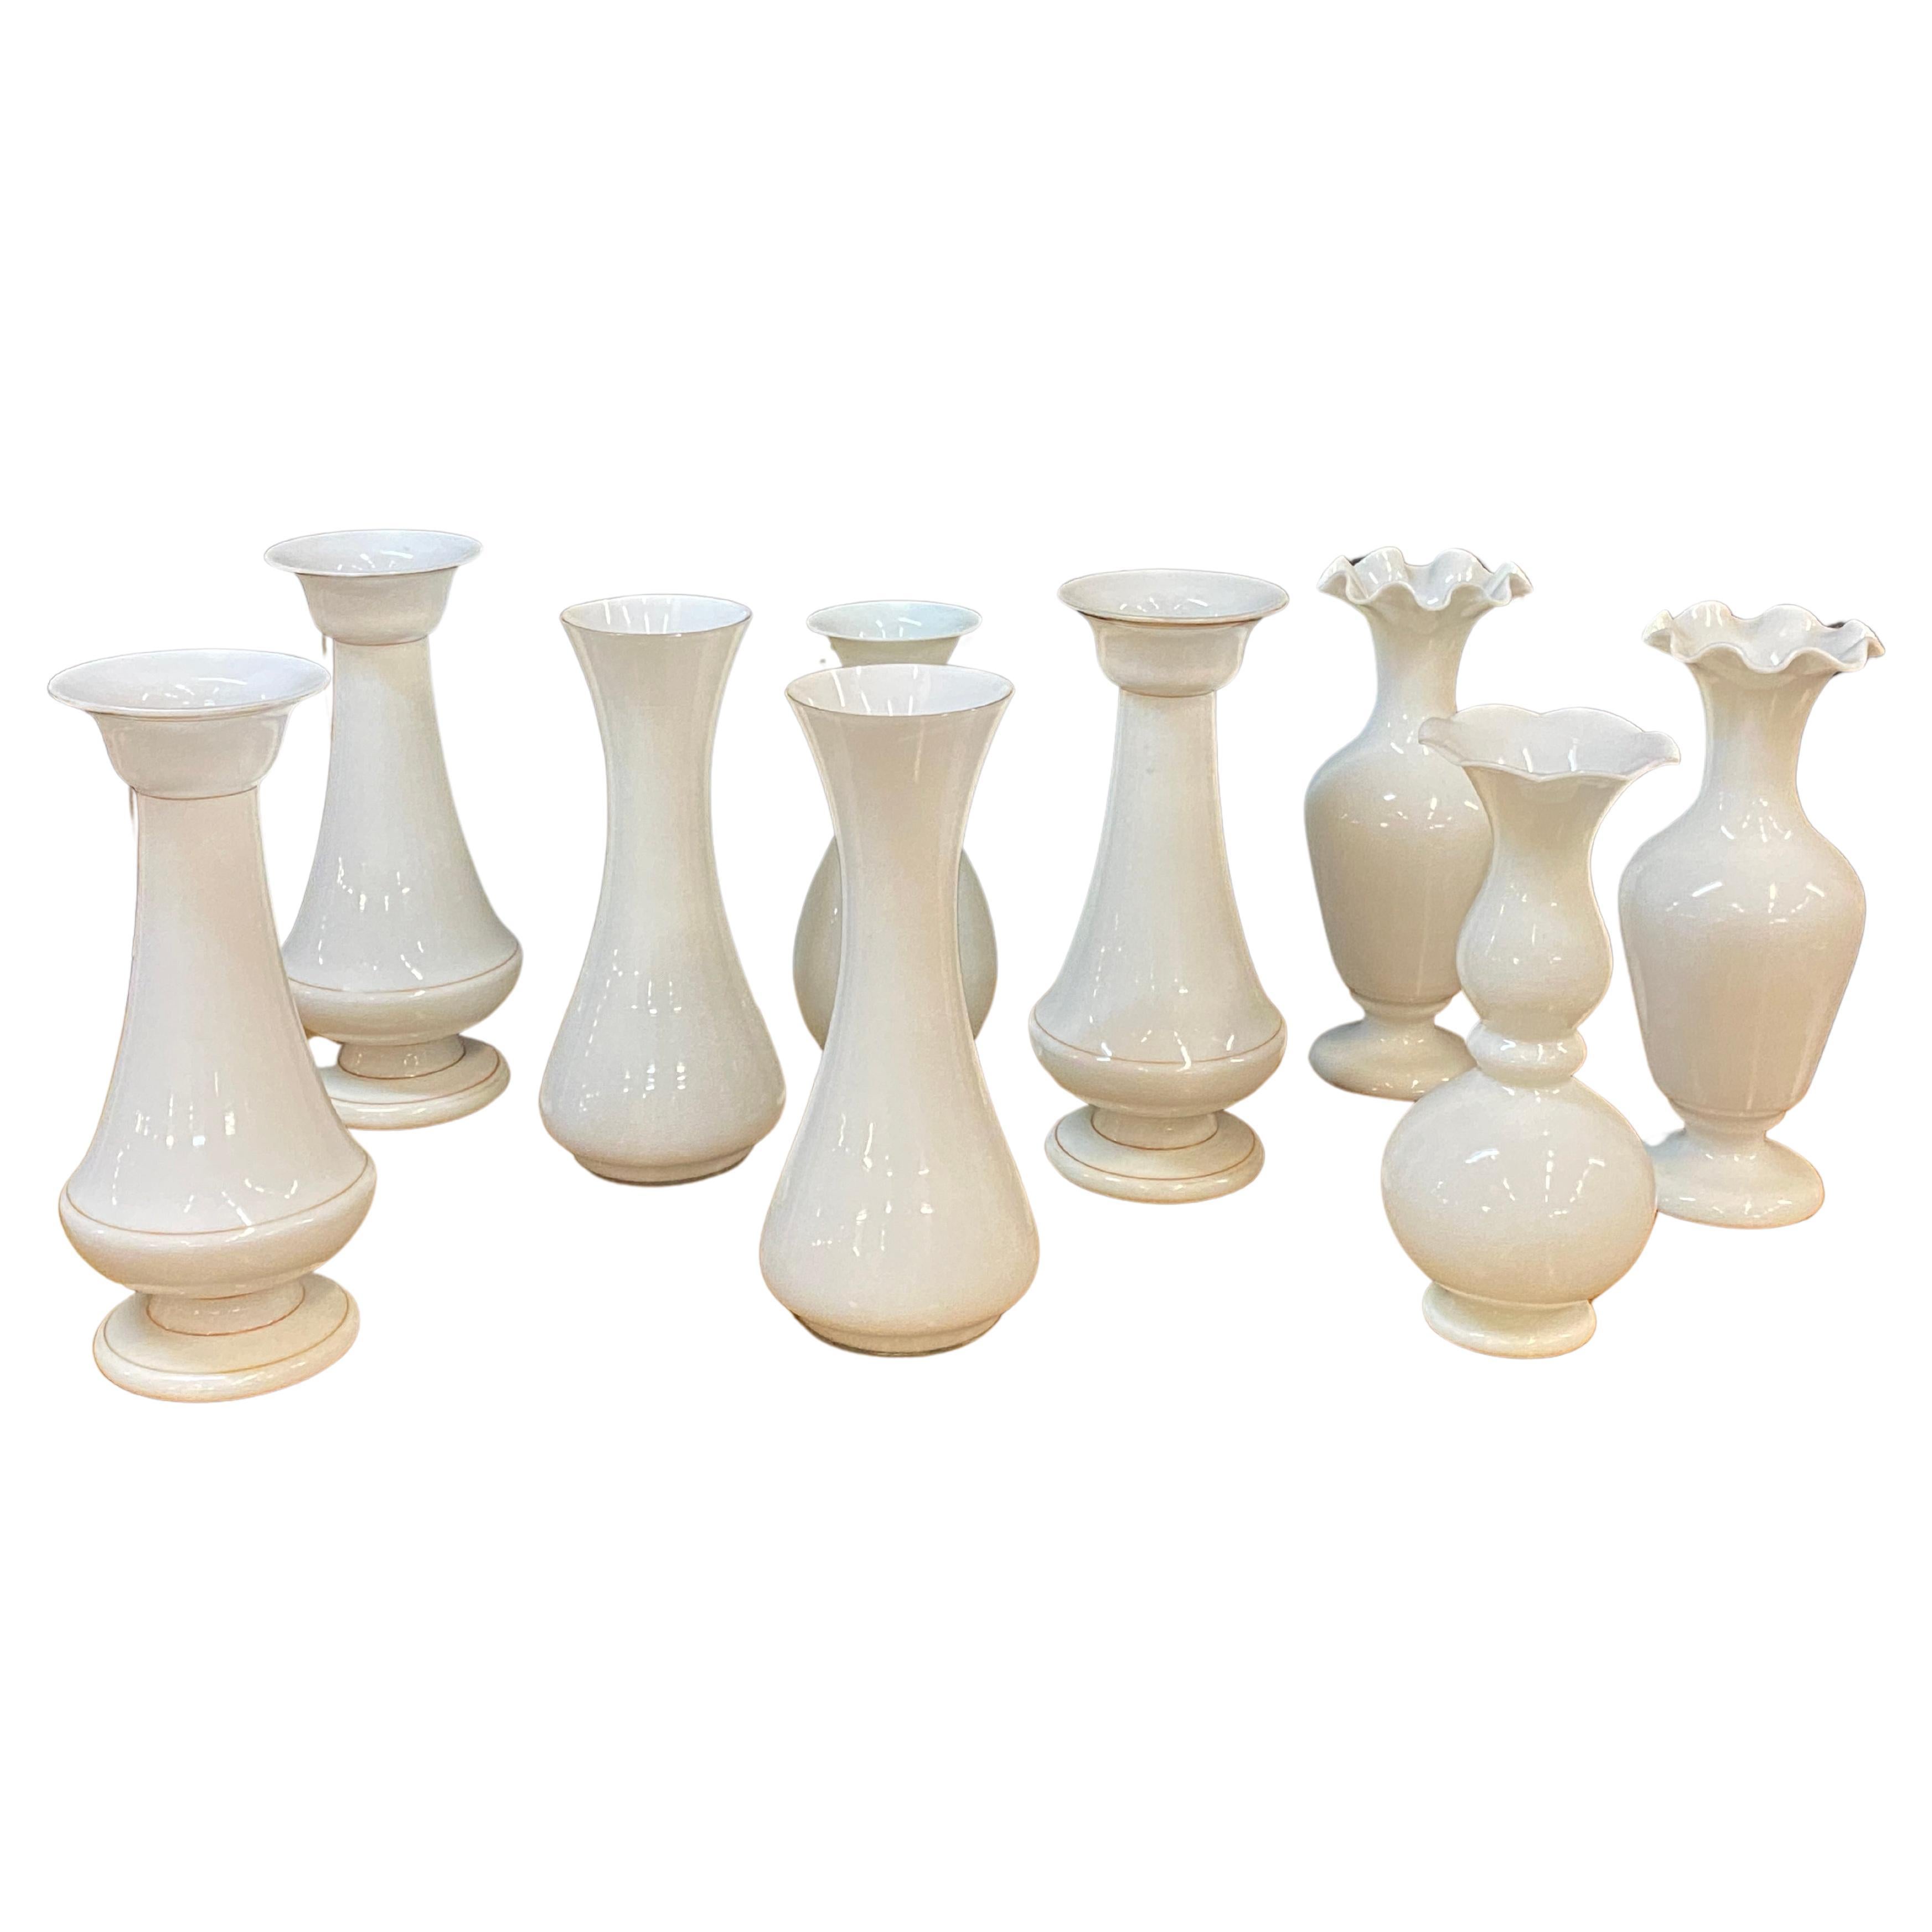 Lot of 9 original opaline vases from the Napoleon III period, height from 11.42" For Sale